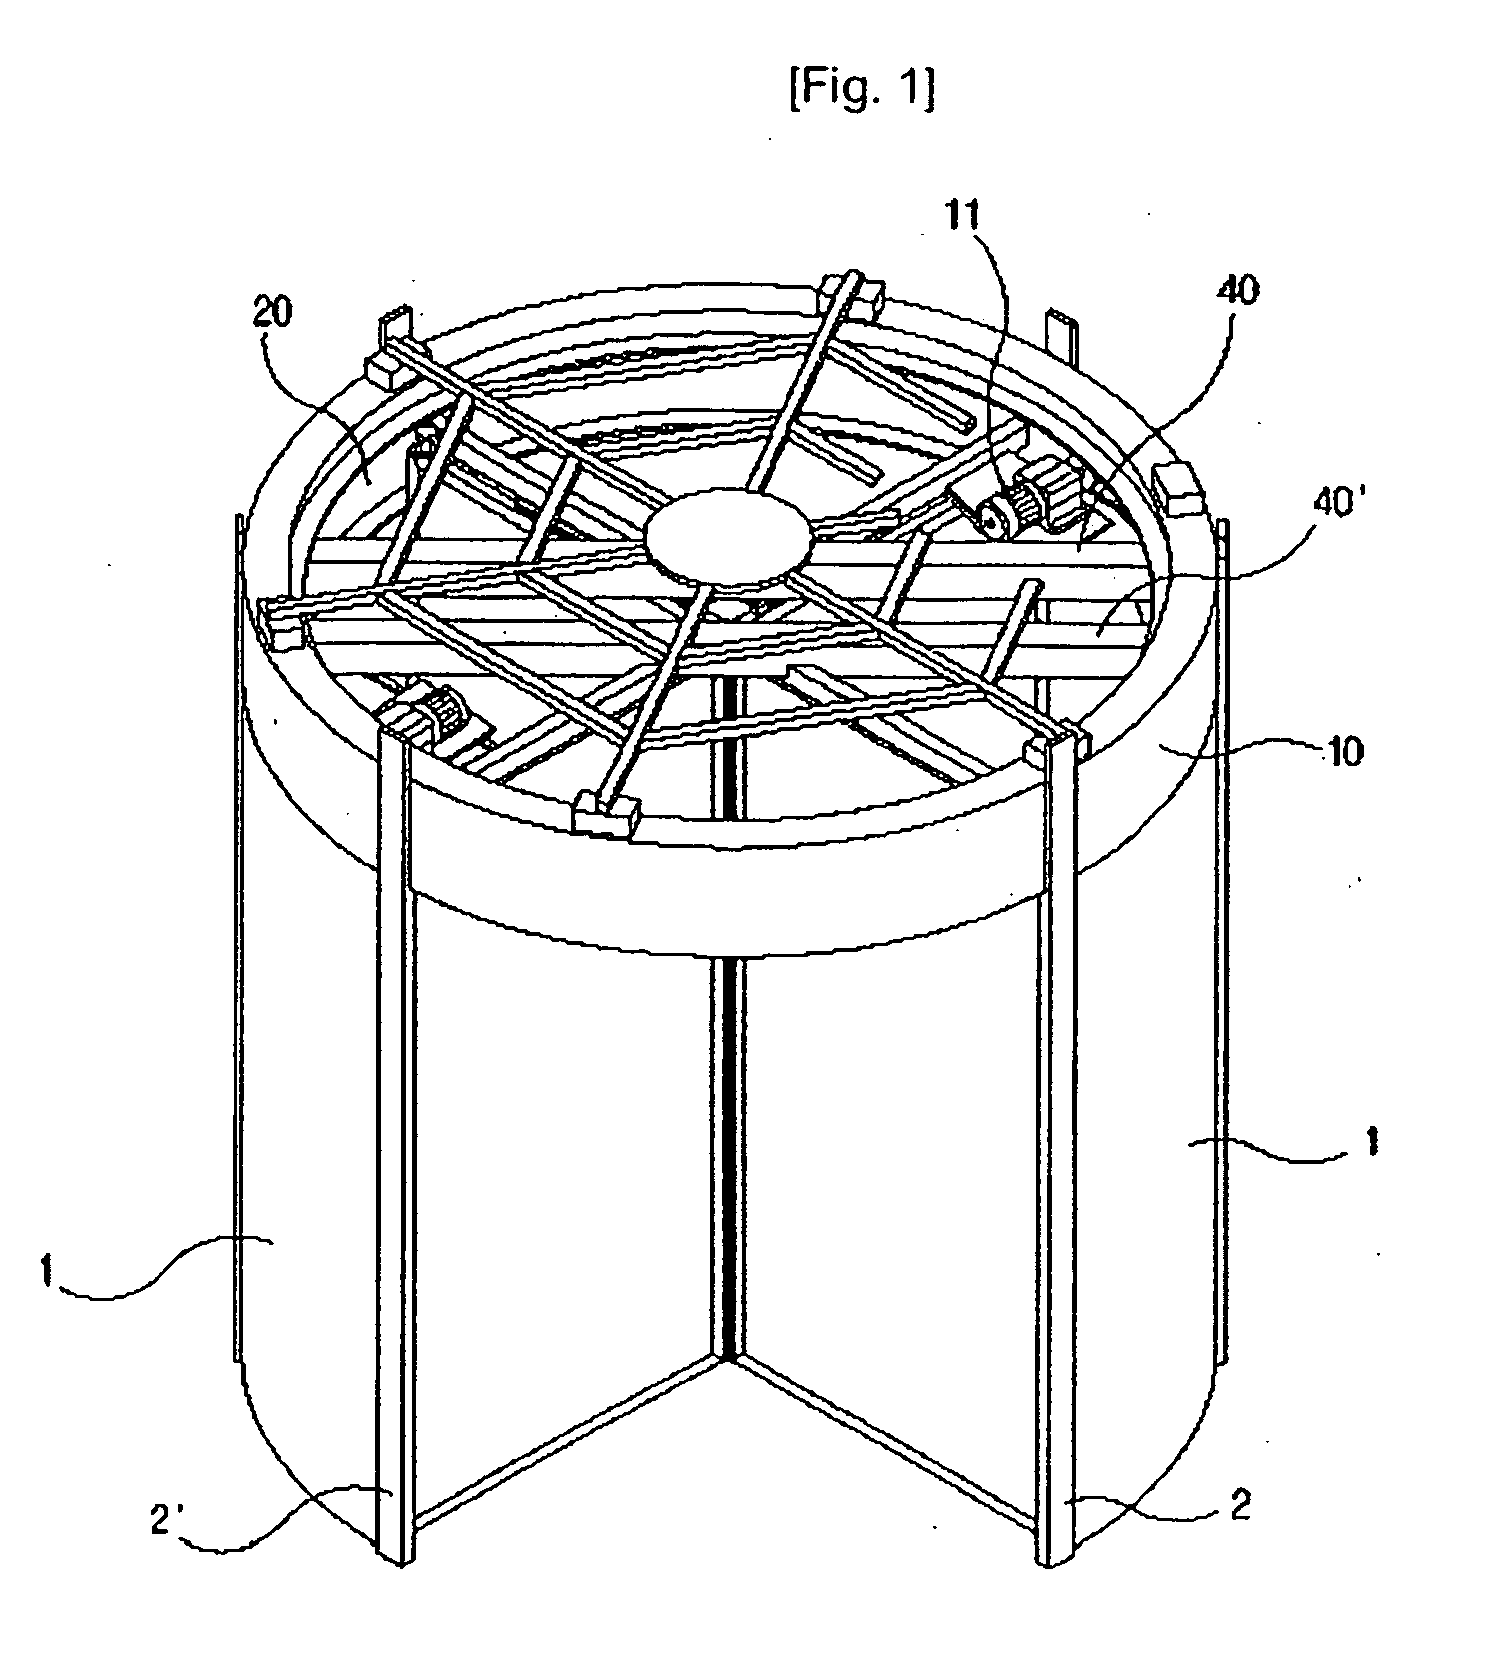 Power transmitting system for rotary wings of automatic revolving door